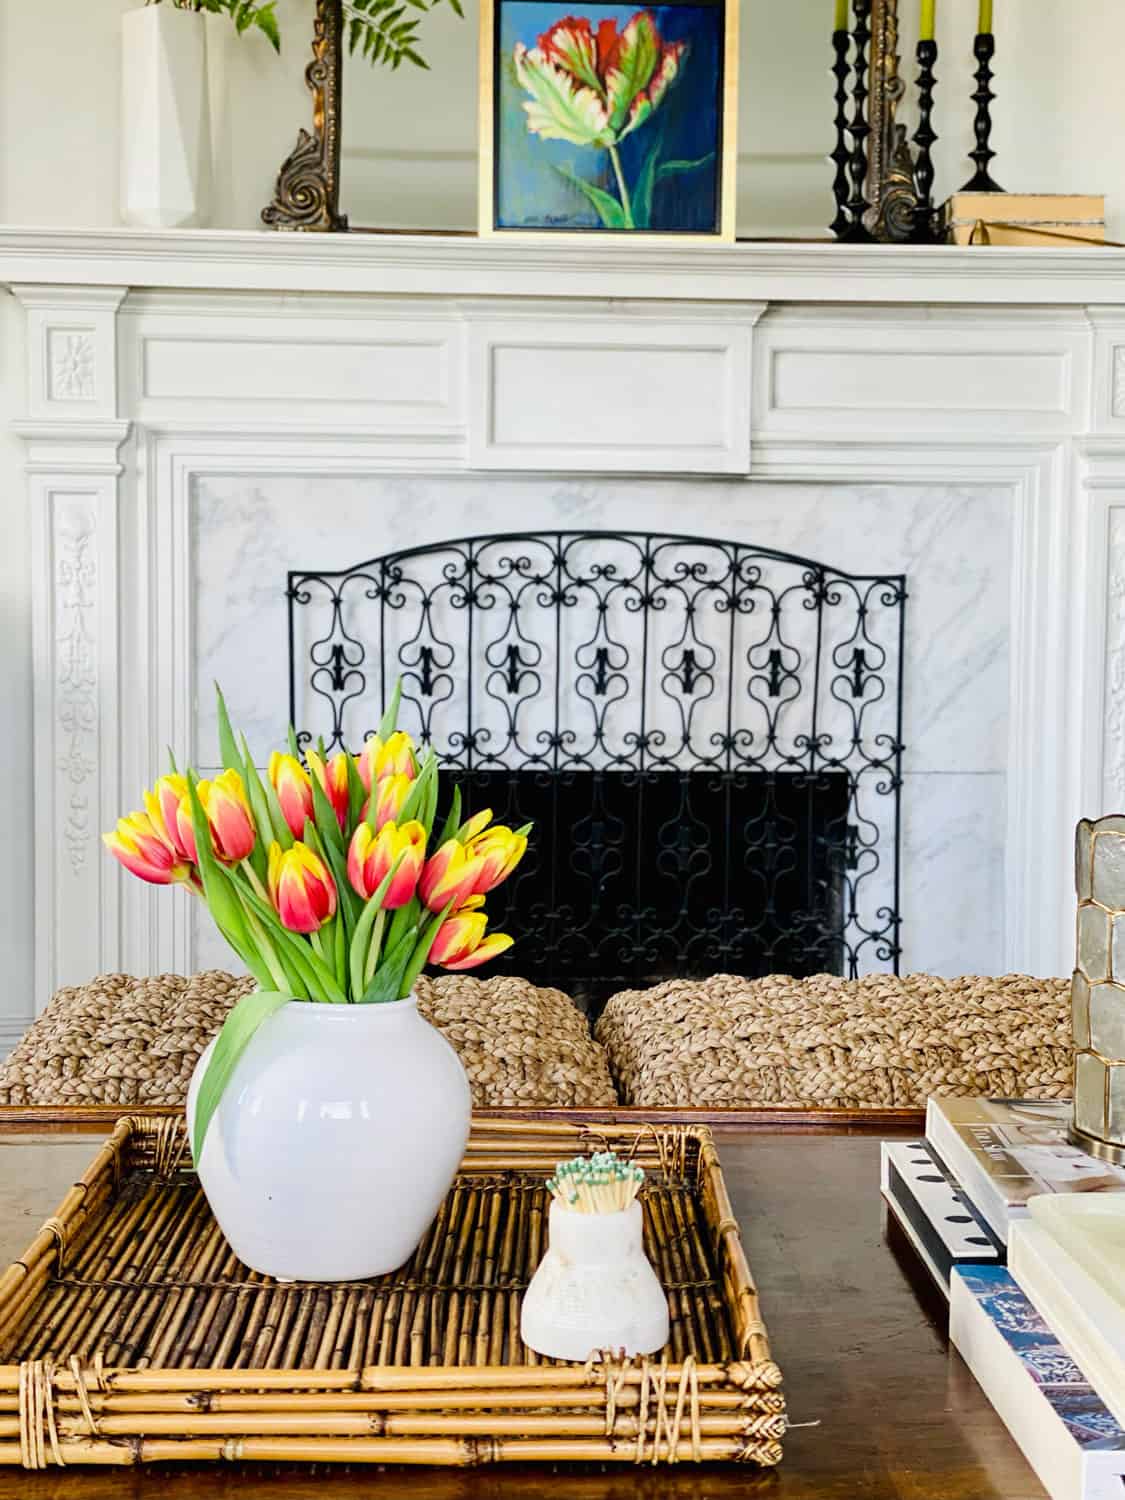 Coffee Table Styling with Tulips and White ceramic vase from Target